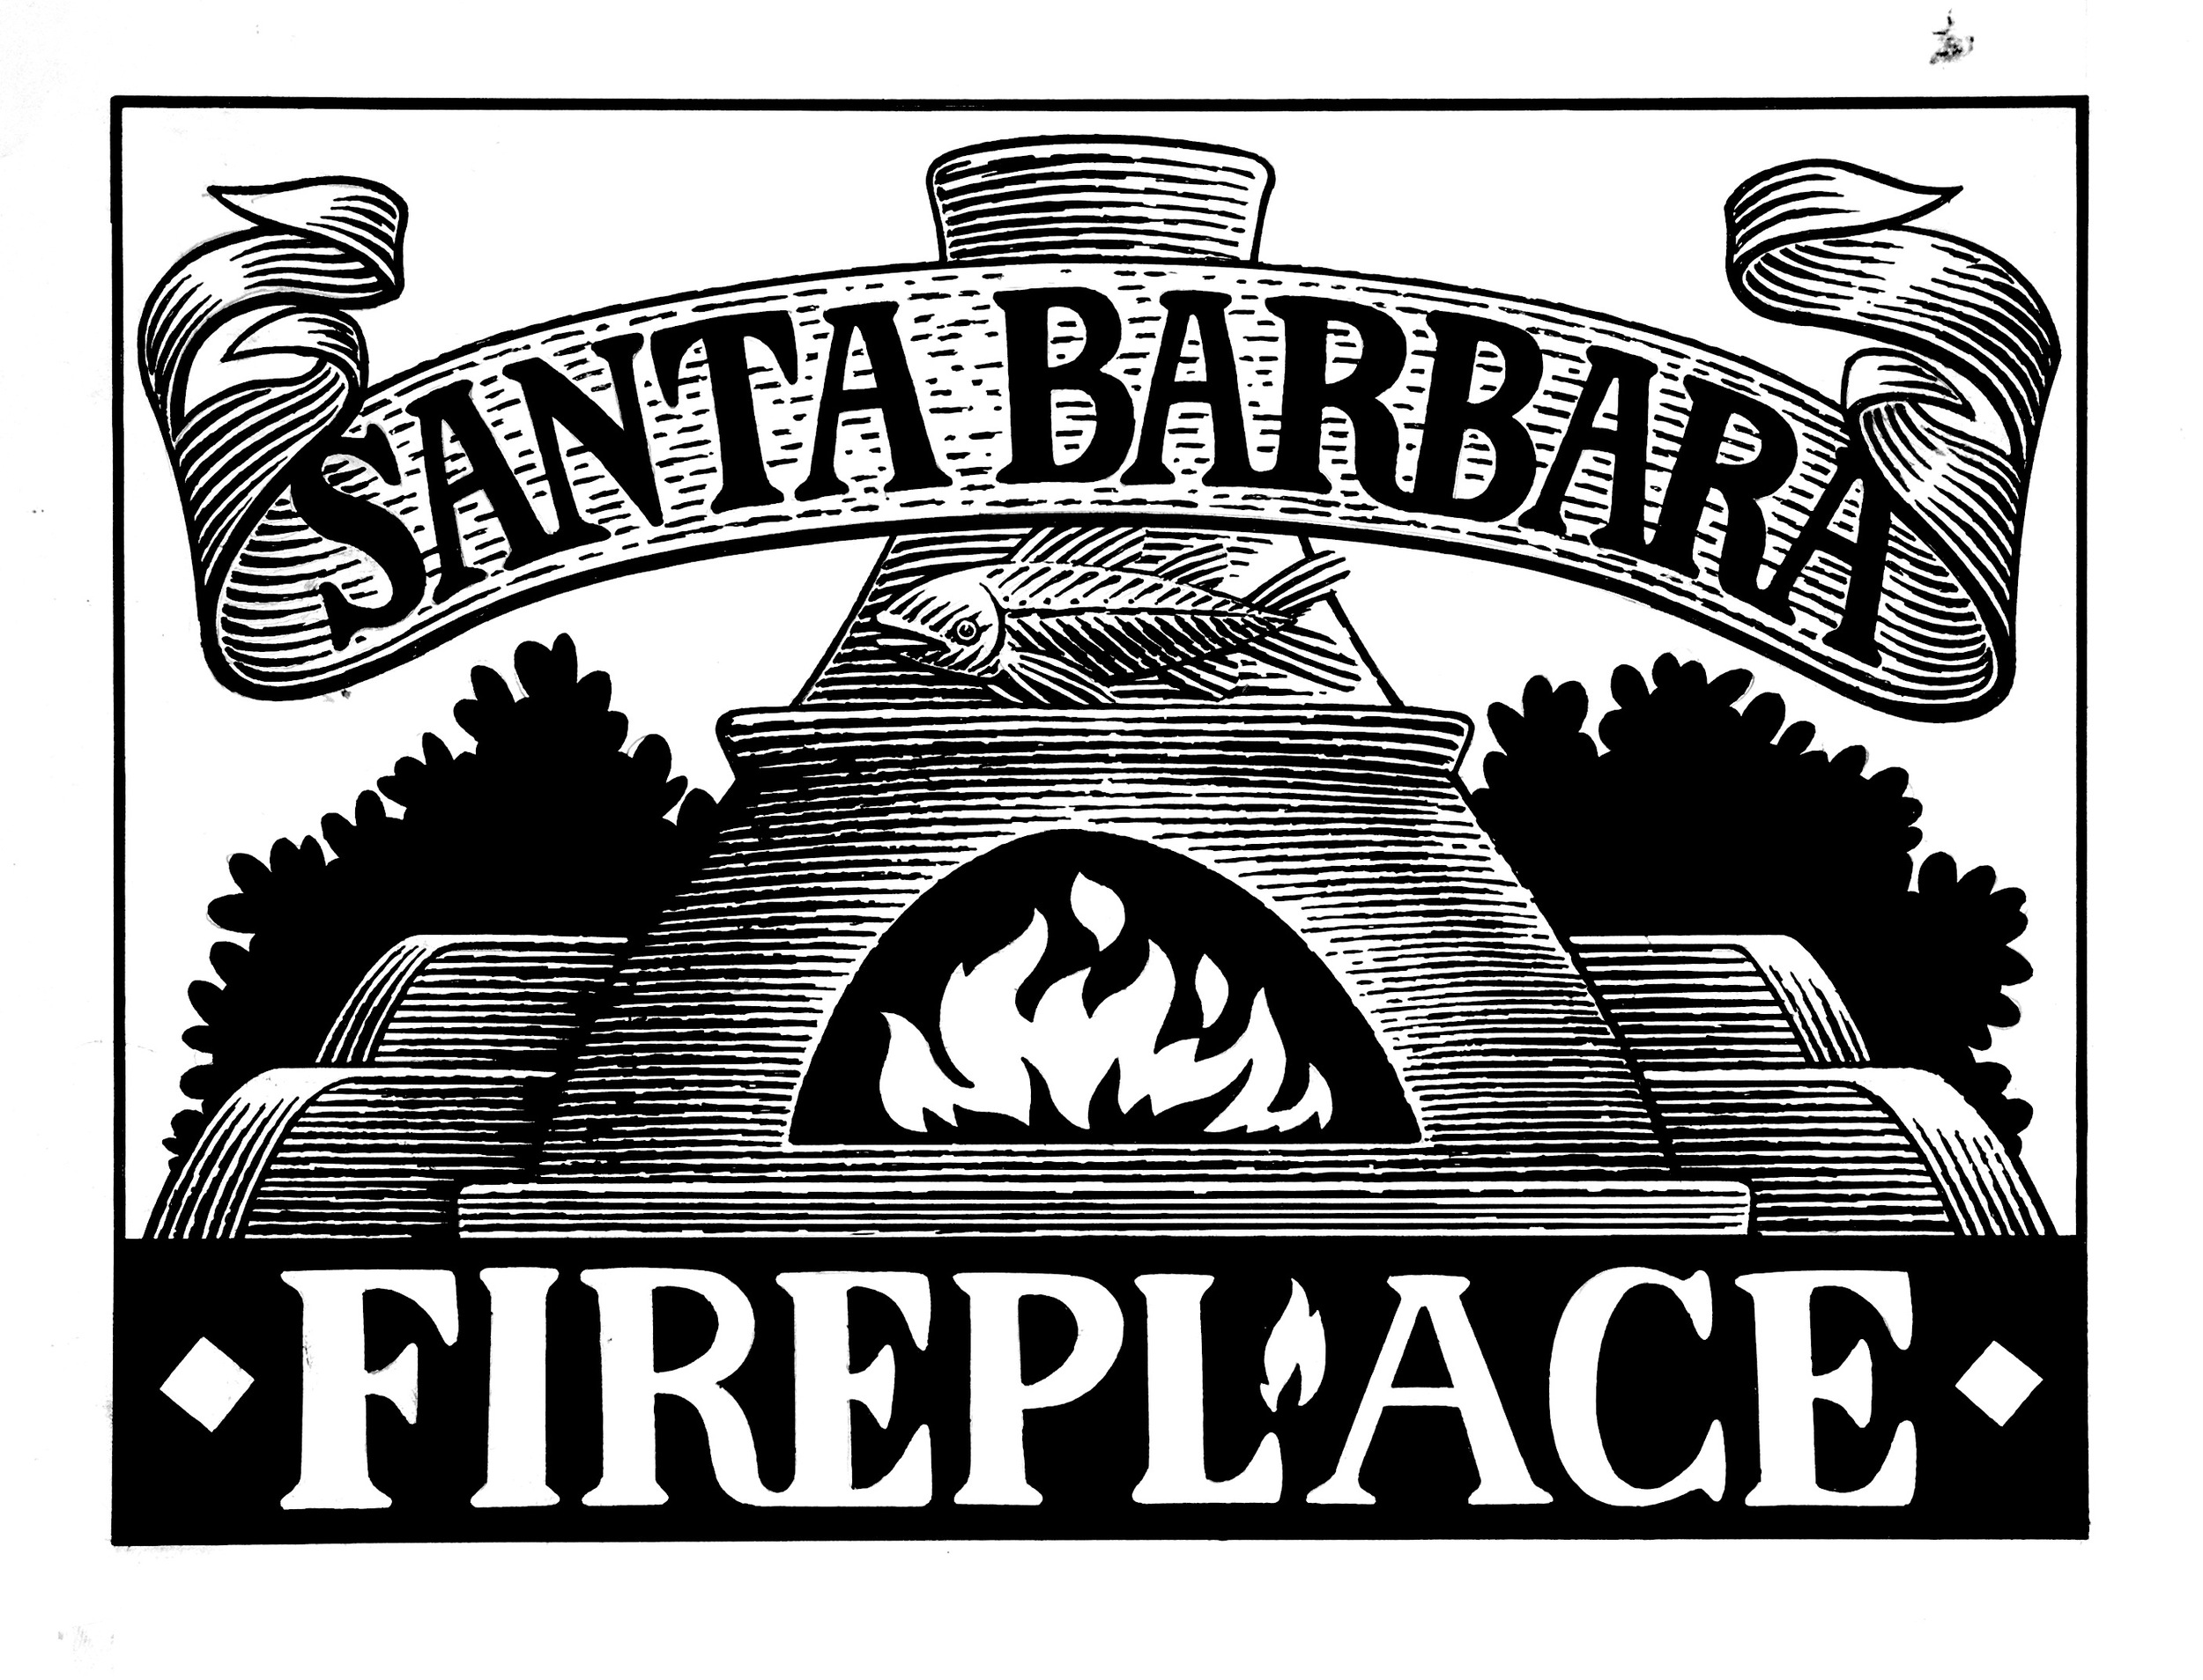 "Santa Barbara Fireplace" by Vernon Courtlandt Johnson. © 2005 VCJ. All rights reserved.